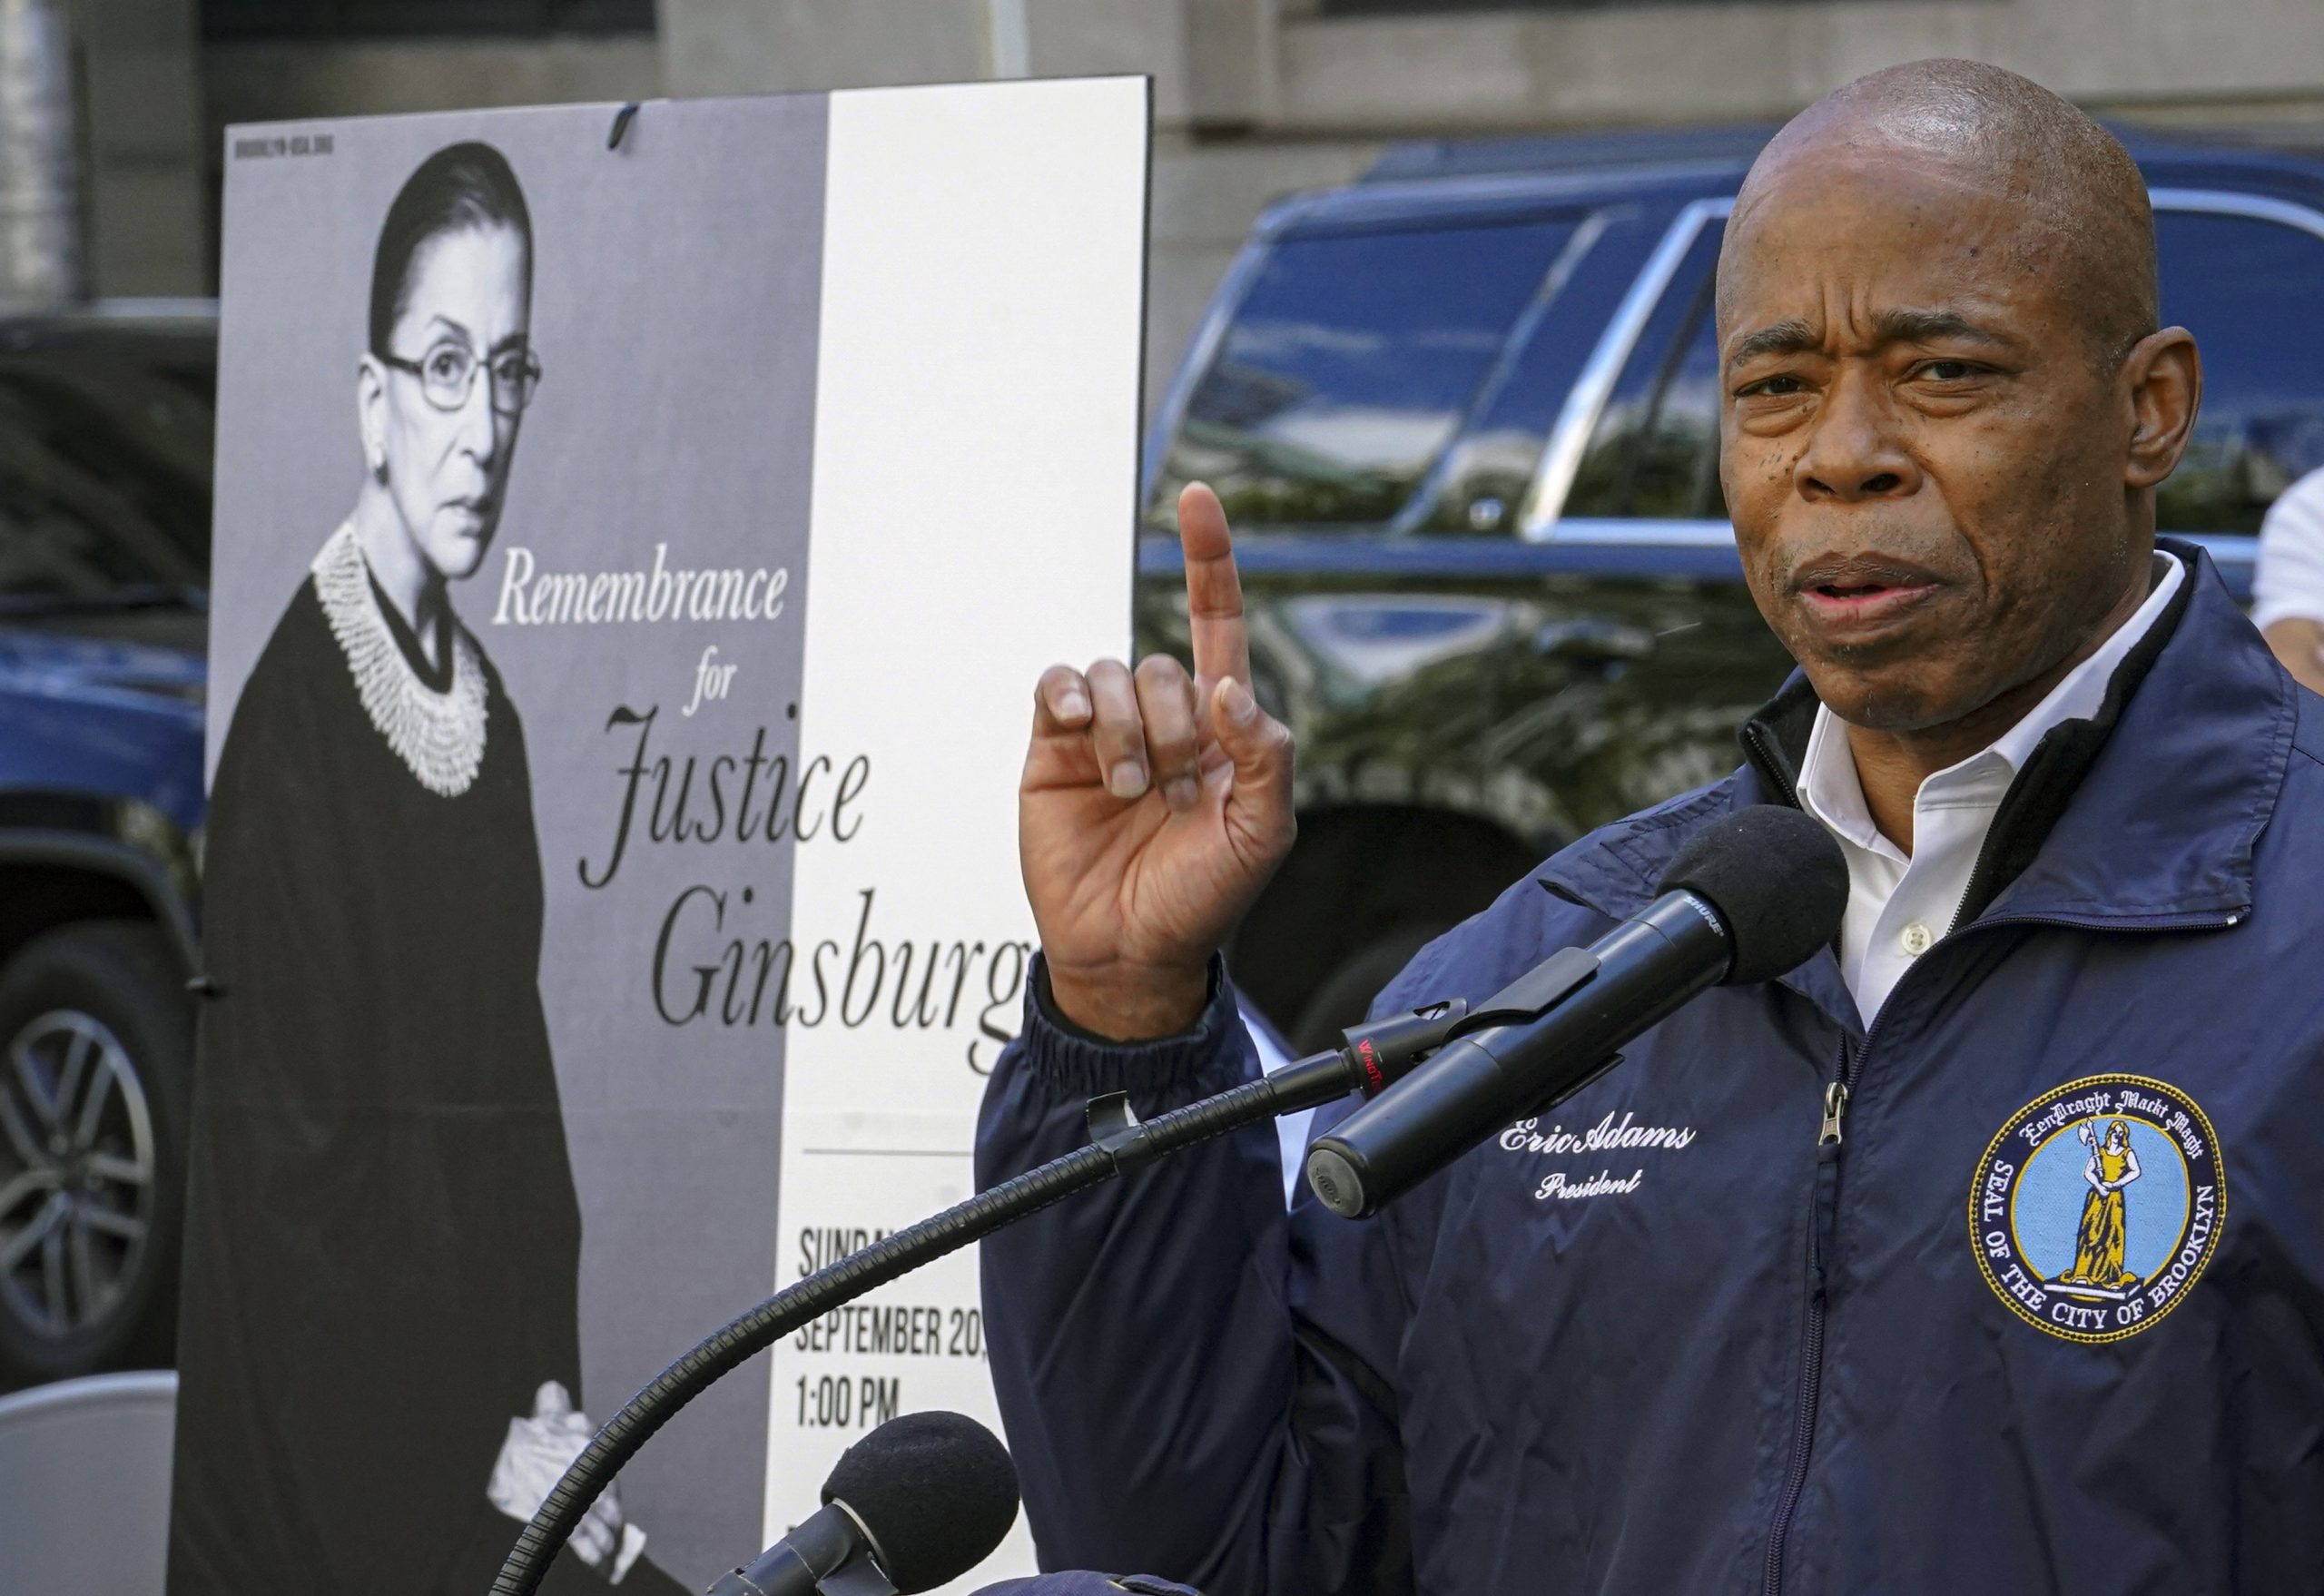 Brooklyn Borough President Eric Adams speaks during a public remembrance to honor the life and legacy of U.S. Supreme Court Justice and former Brooklynite Ruth Bader Ginsburg, outside Brooklyn's, Municipal Building, Sunday Sept. 20, 2020, in New York.